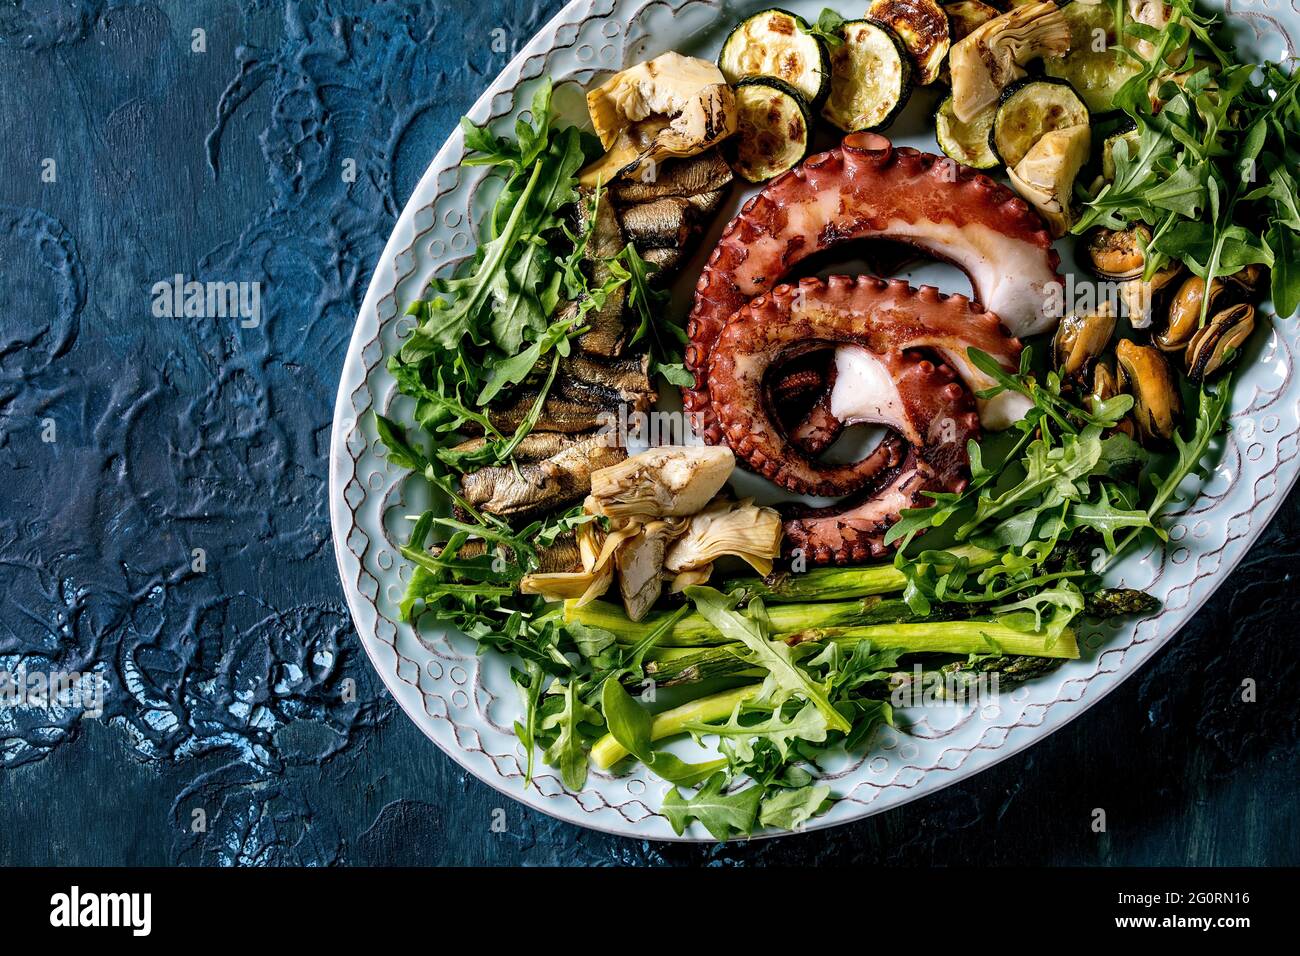 Seafood salad. Coocked grilled tentacles of octopus, sardines and mussels on blue ceramic plate with arugula salad, zucchini and asparagus over blue t Stock Photo